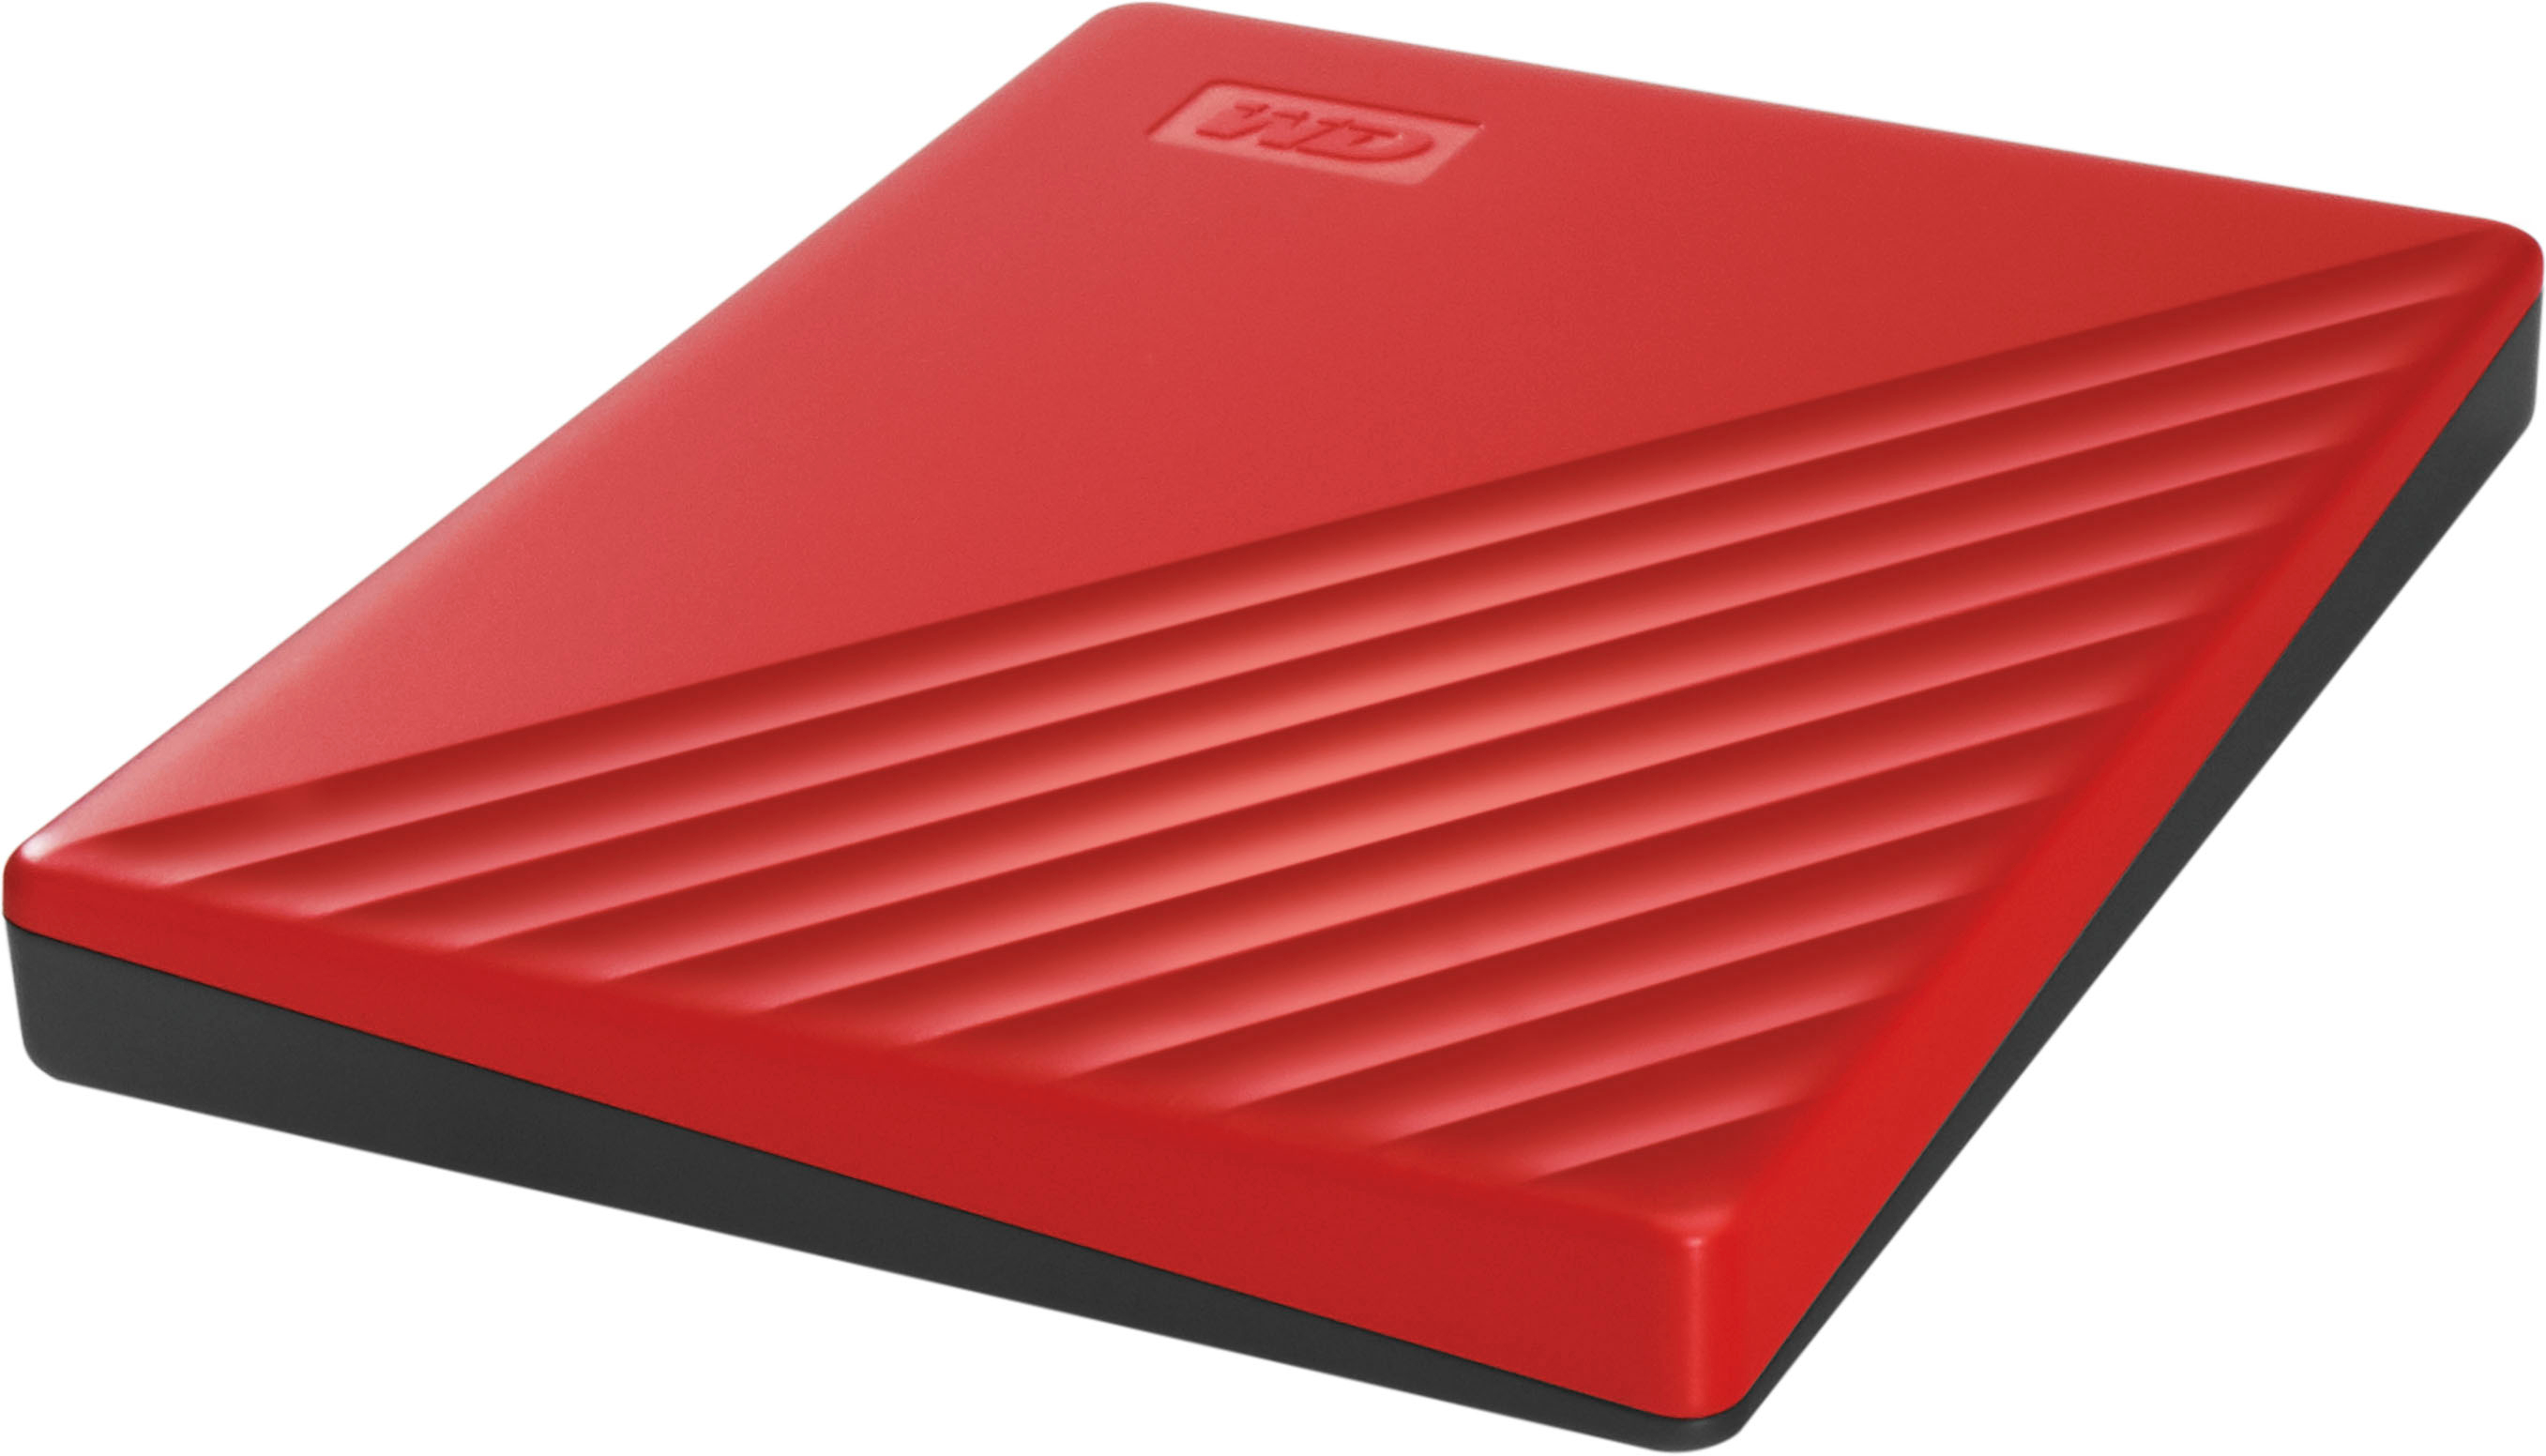 Robe Husk hver for sig WD My Passport 2TB External USB 3.0 Portable Hard Drive Red  WDBYVG0020BRD-WESN - Best Buy